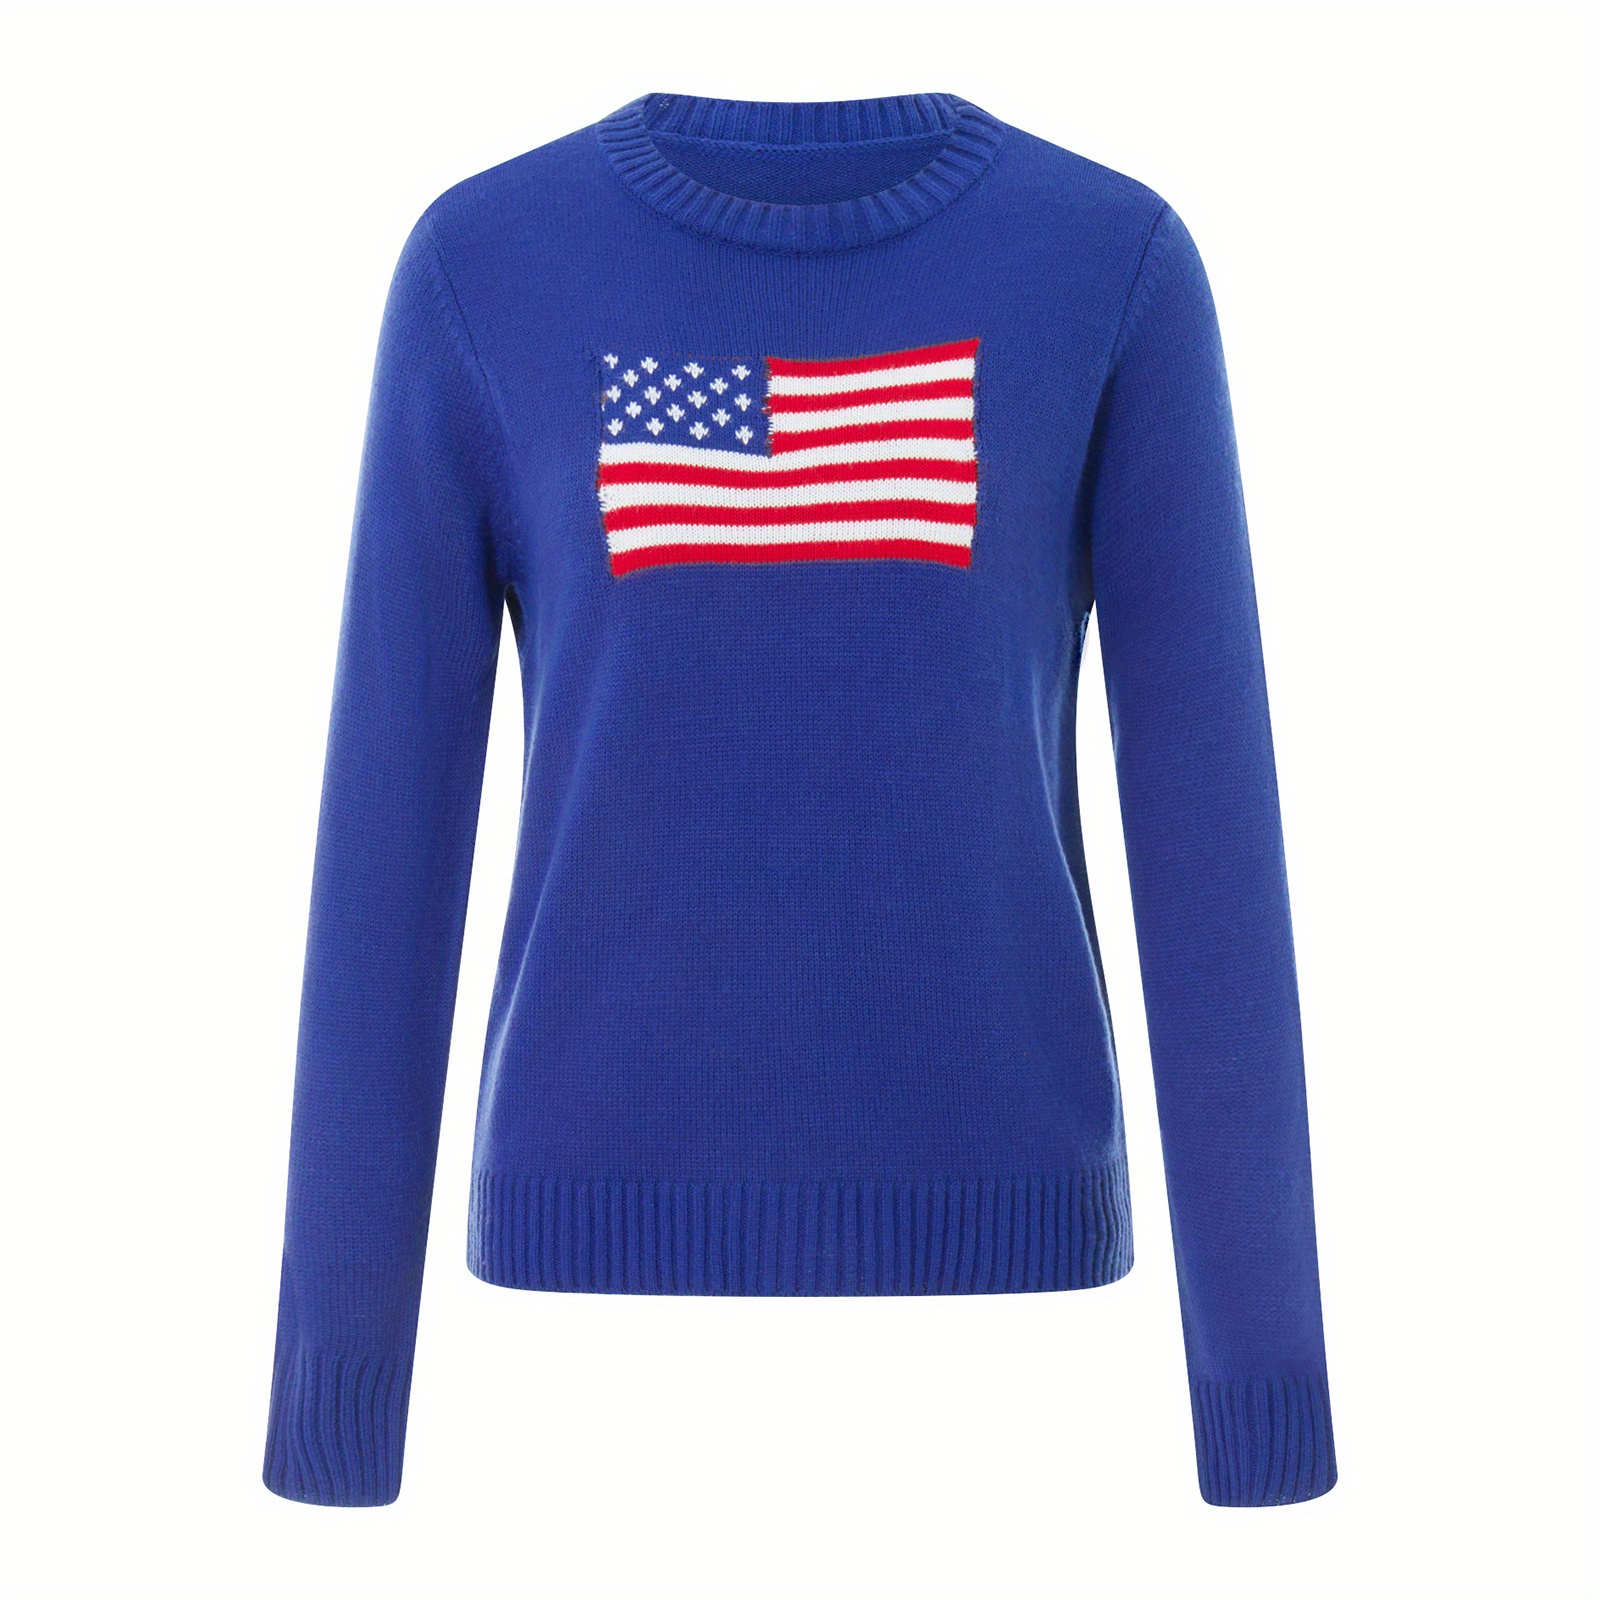 

Women's Flag Pattern Long Sleeve Round Neck Sweater Casual Loose Pullover Sweater